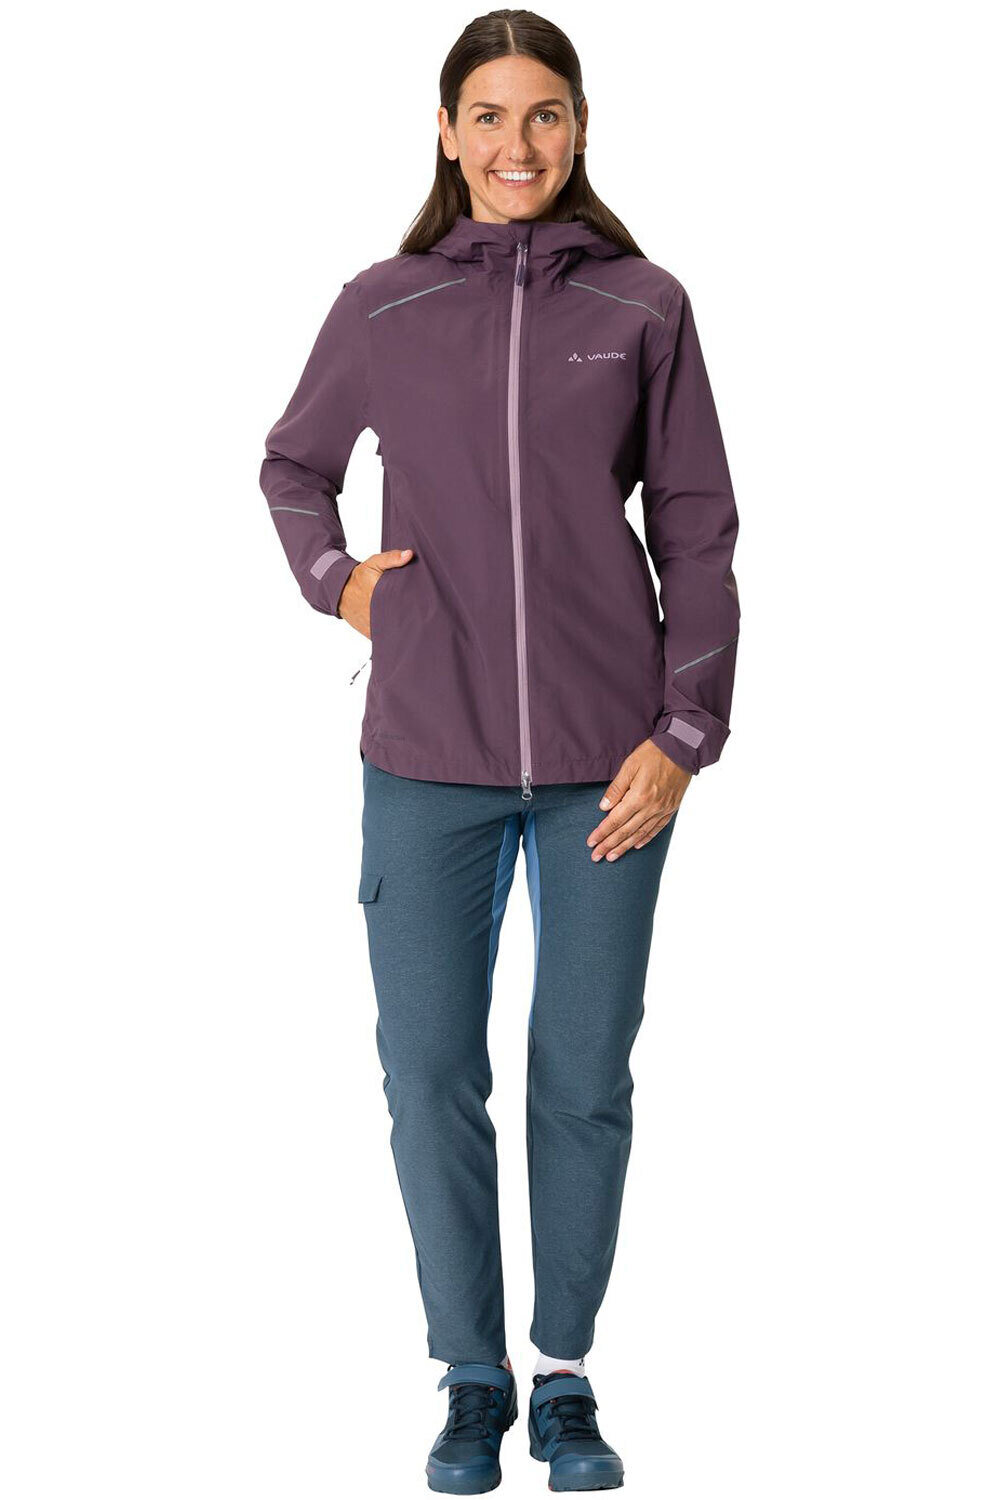 Vaude chaqueta impermeable ciclismo mujer Women's Yaras Jacket IV 04